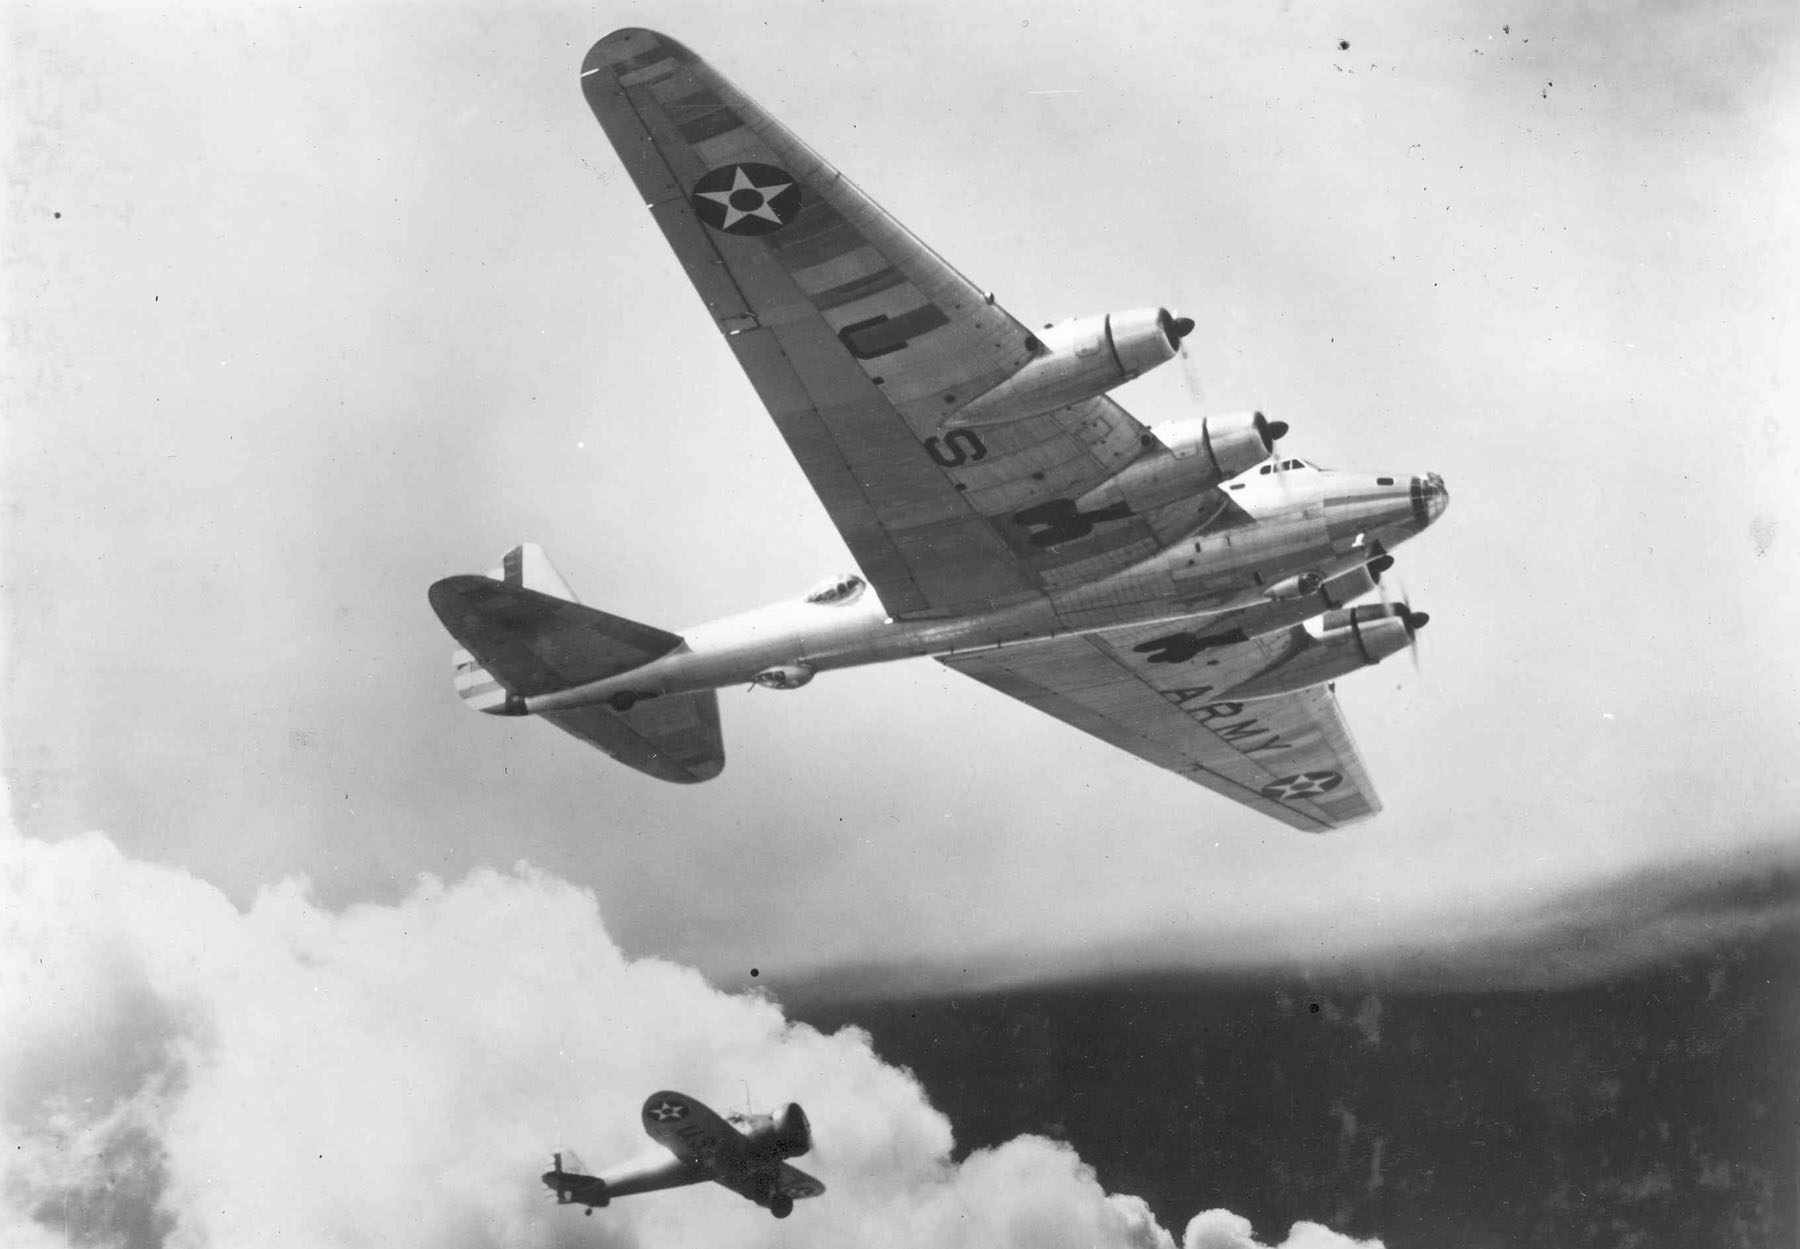 The Boeing XB-15 experimental long-range heavy bomber flies in formation with a Boeing YP-29 pursuit. (U.S. Air Force)